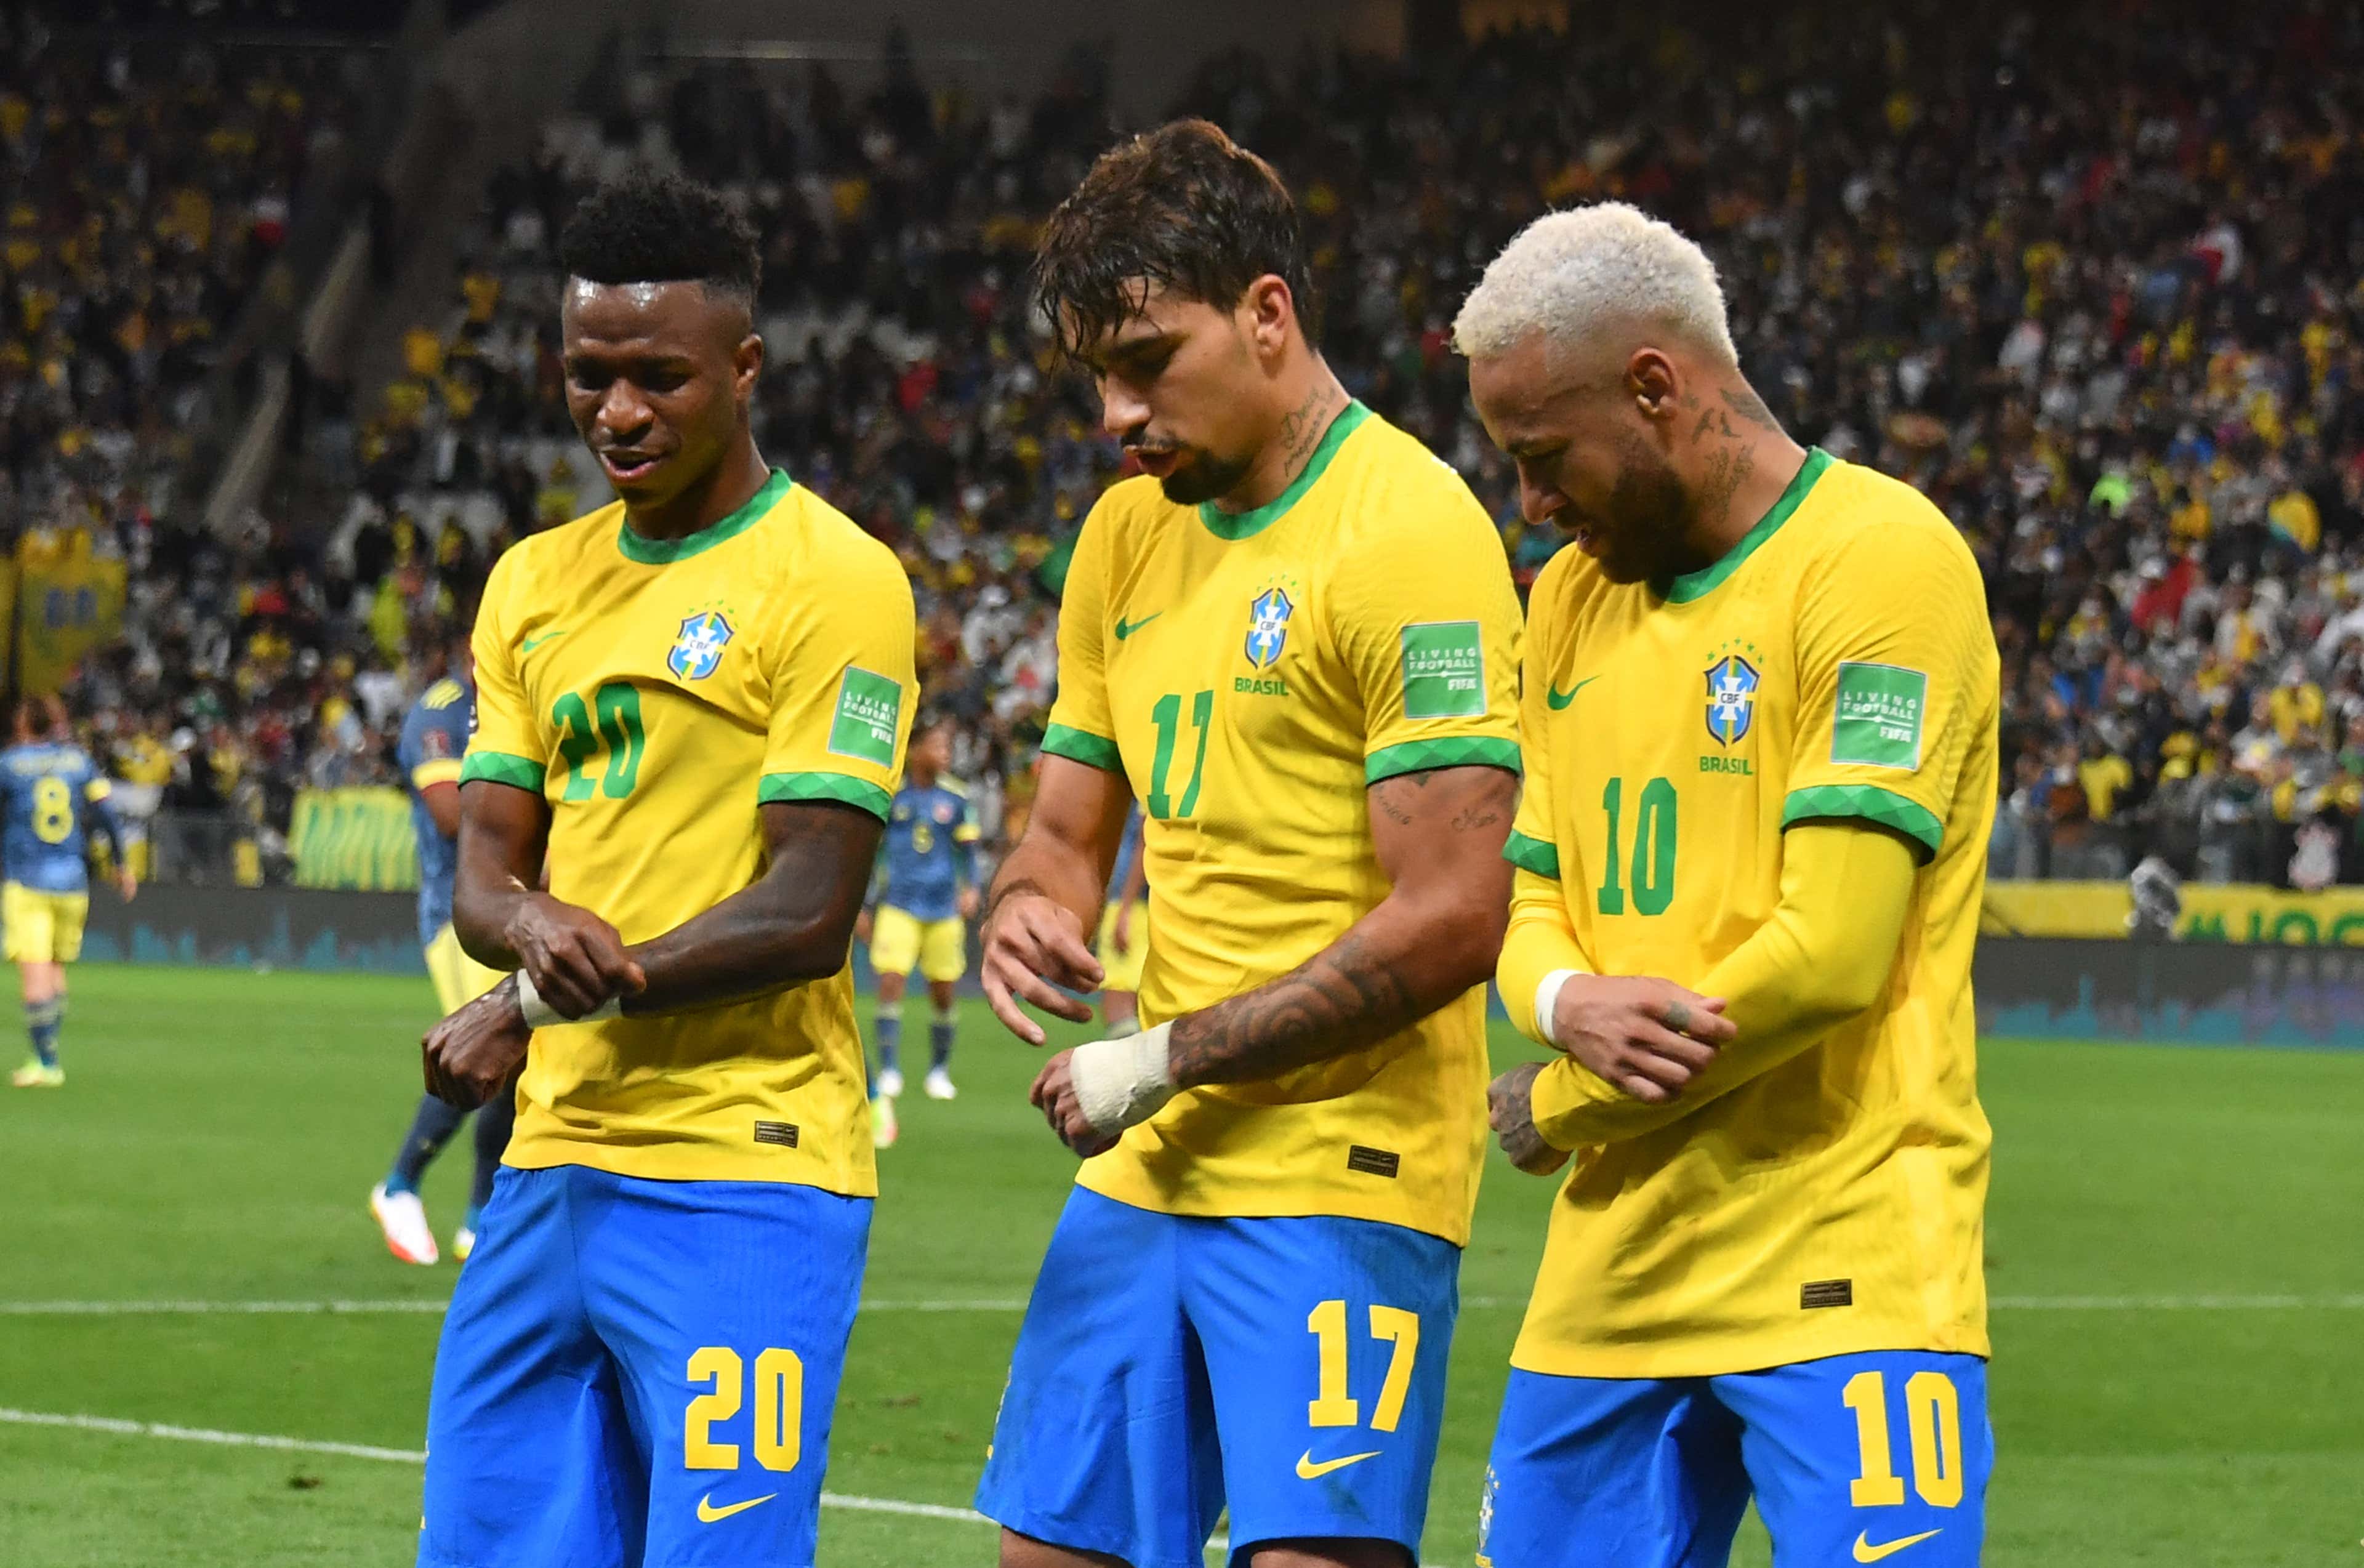 What are the nicknames of the Brazil national team?